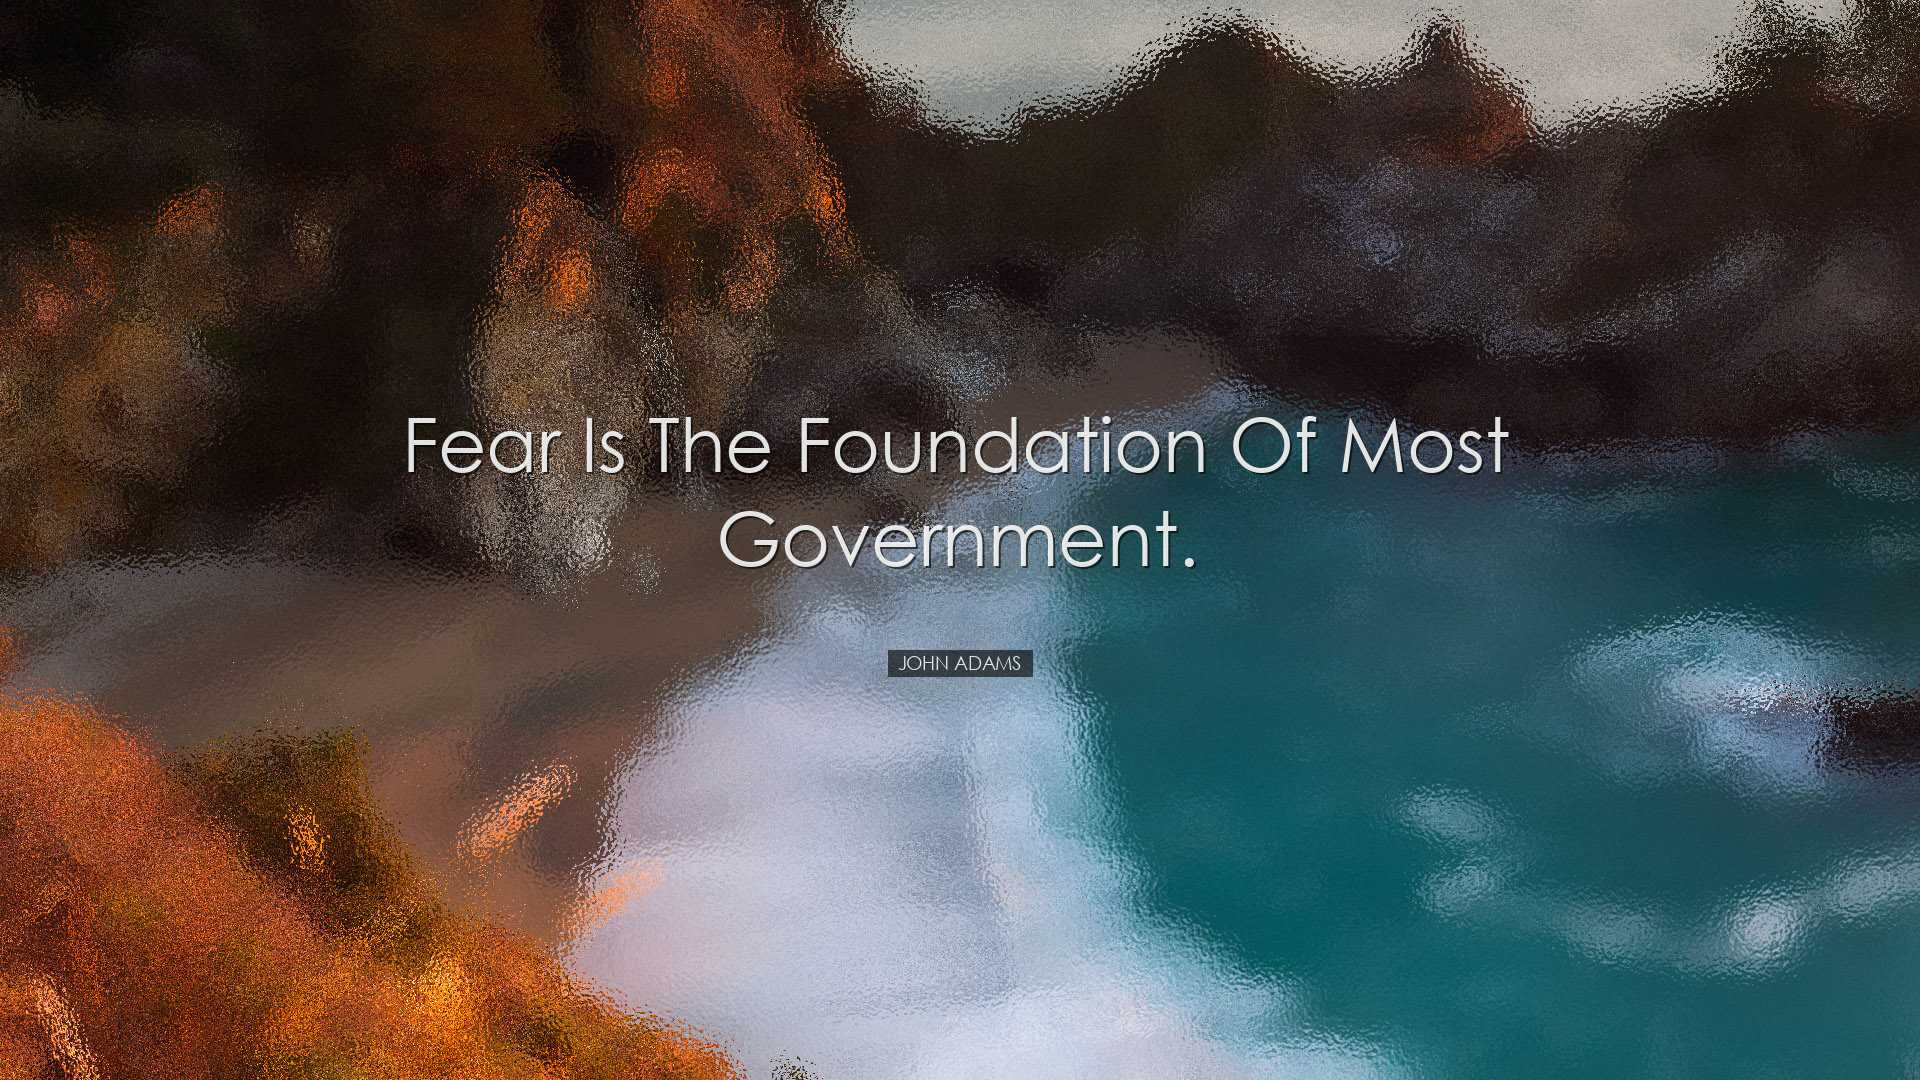 Fear is the foundation of most government. - John Adams